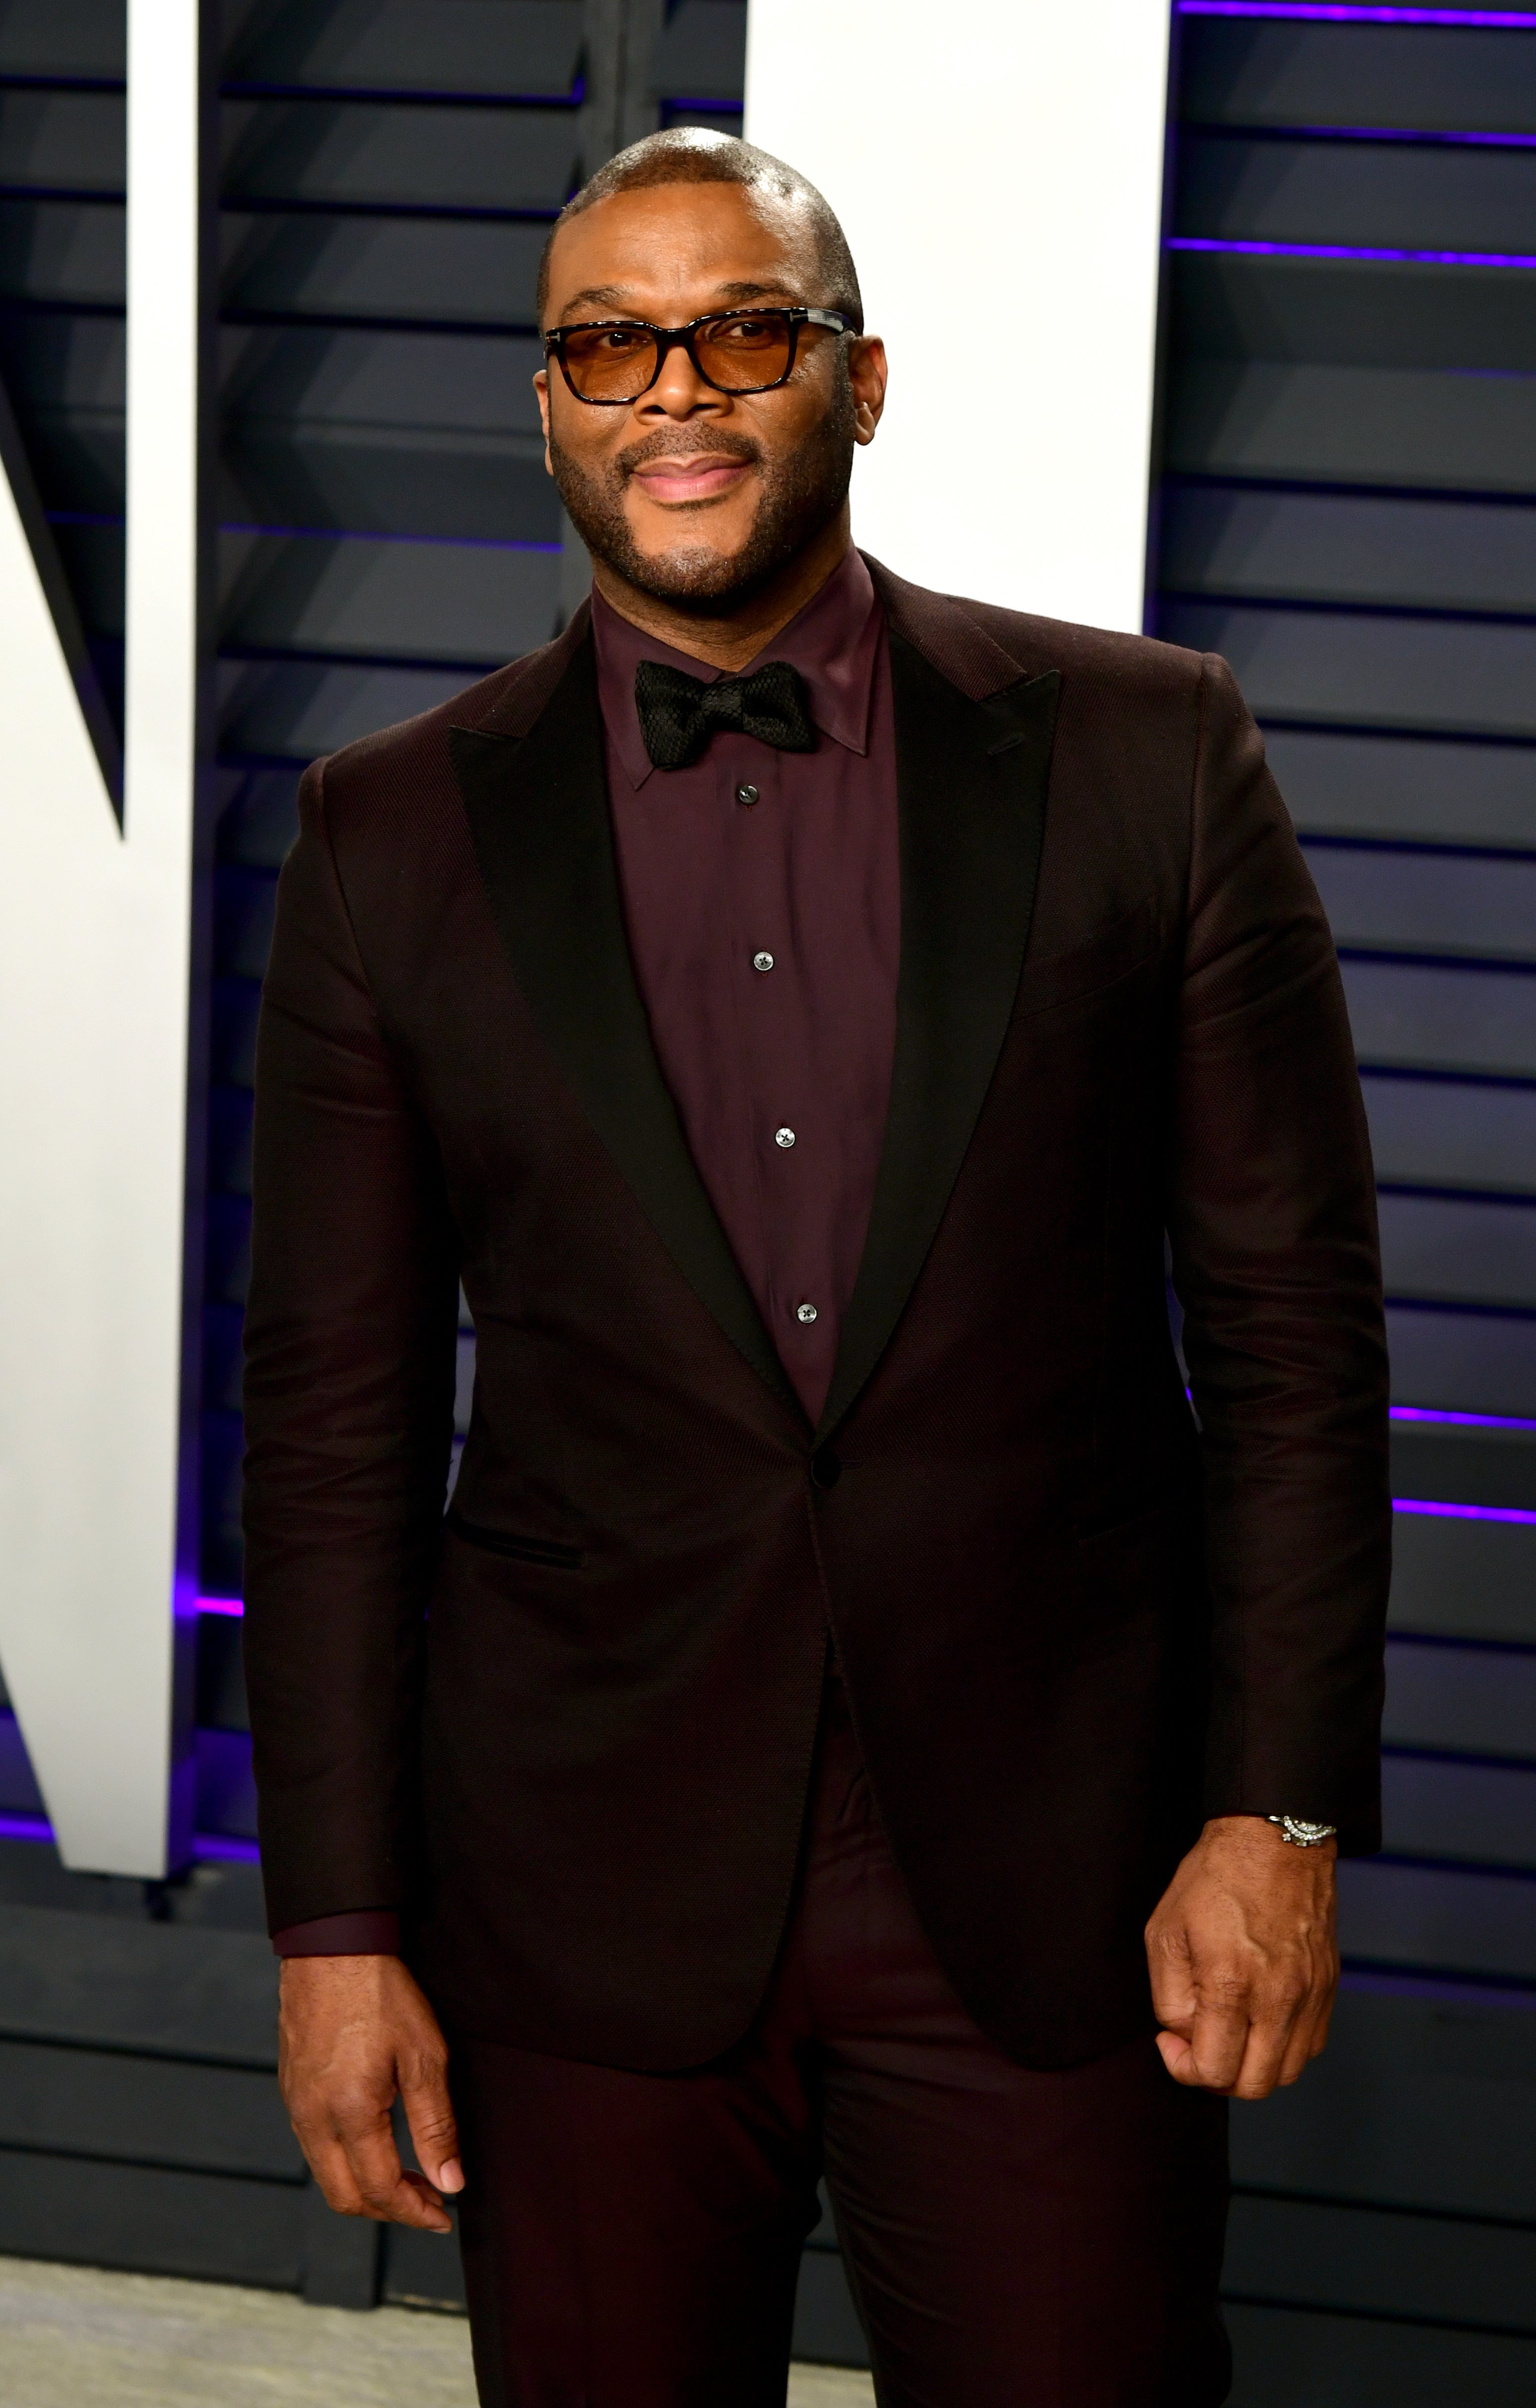 Tyler Perry attending the Vanity Fair Oscar Party held at the Wallis Annenberg Center for the Performing Arts in Beverly Hills, Los Angeles (Ian West/PA)